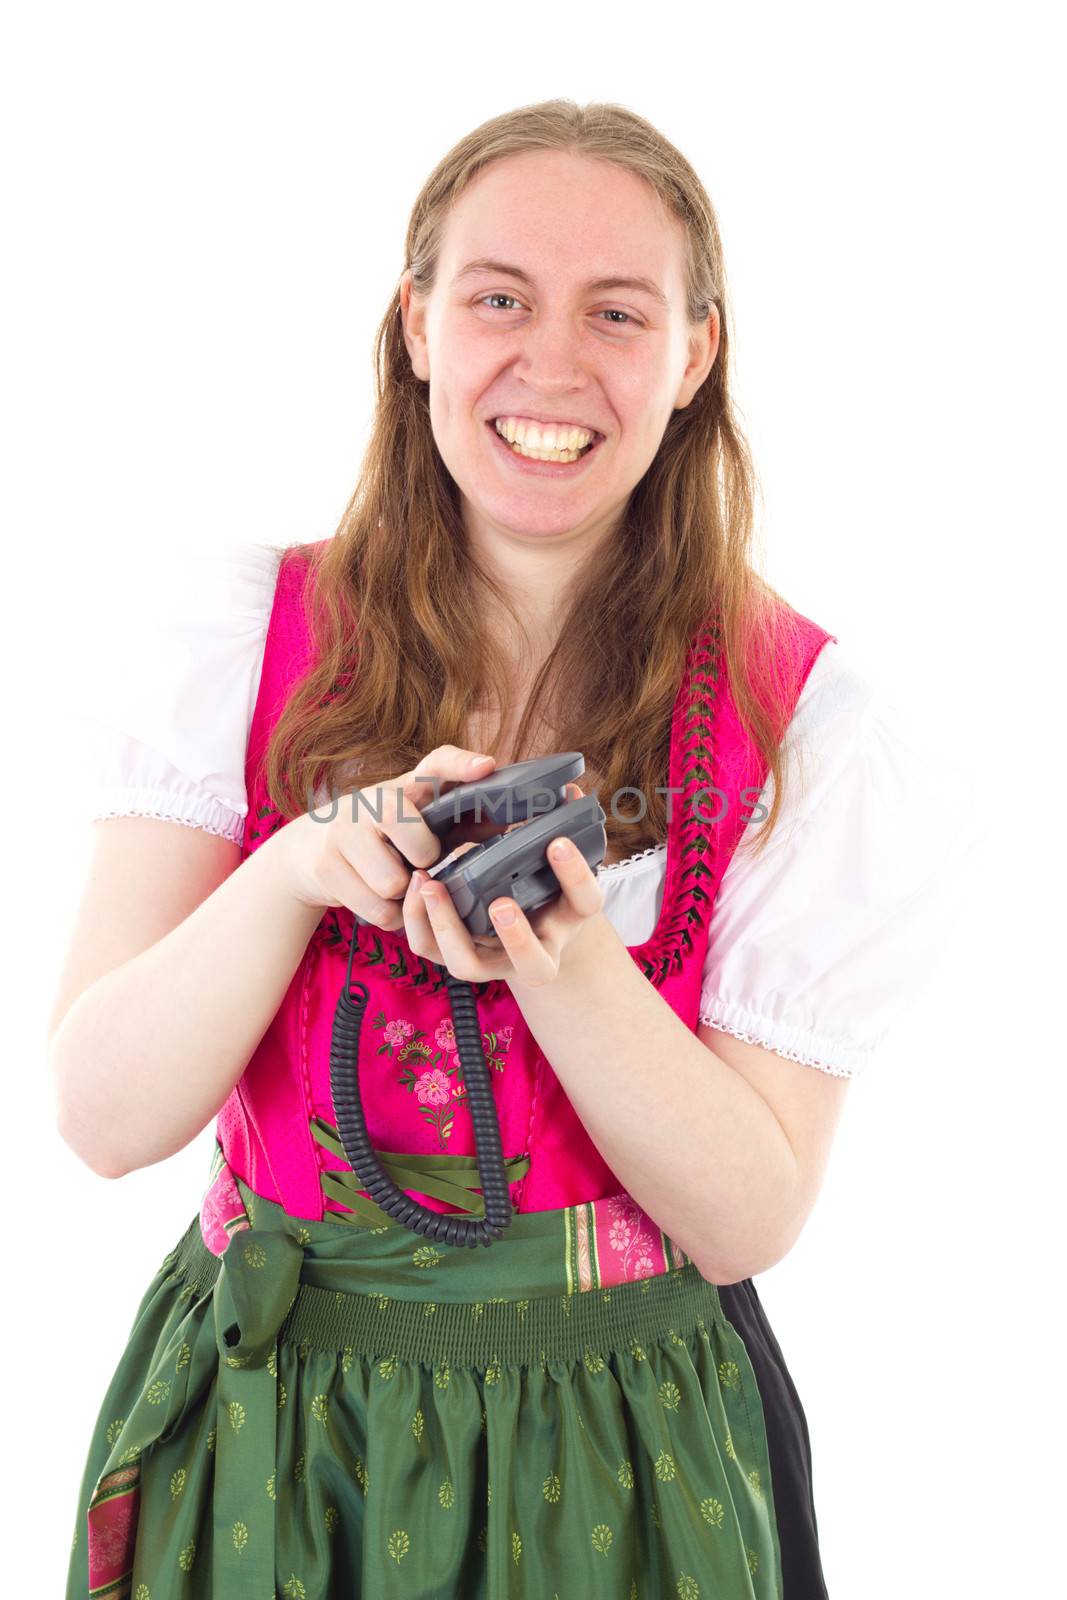 Very happy girl in dirndl hanging up the phone